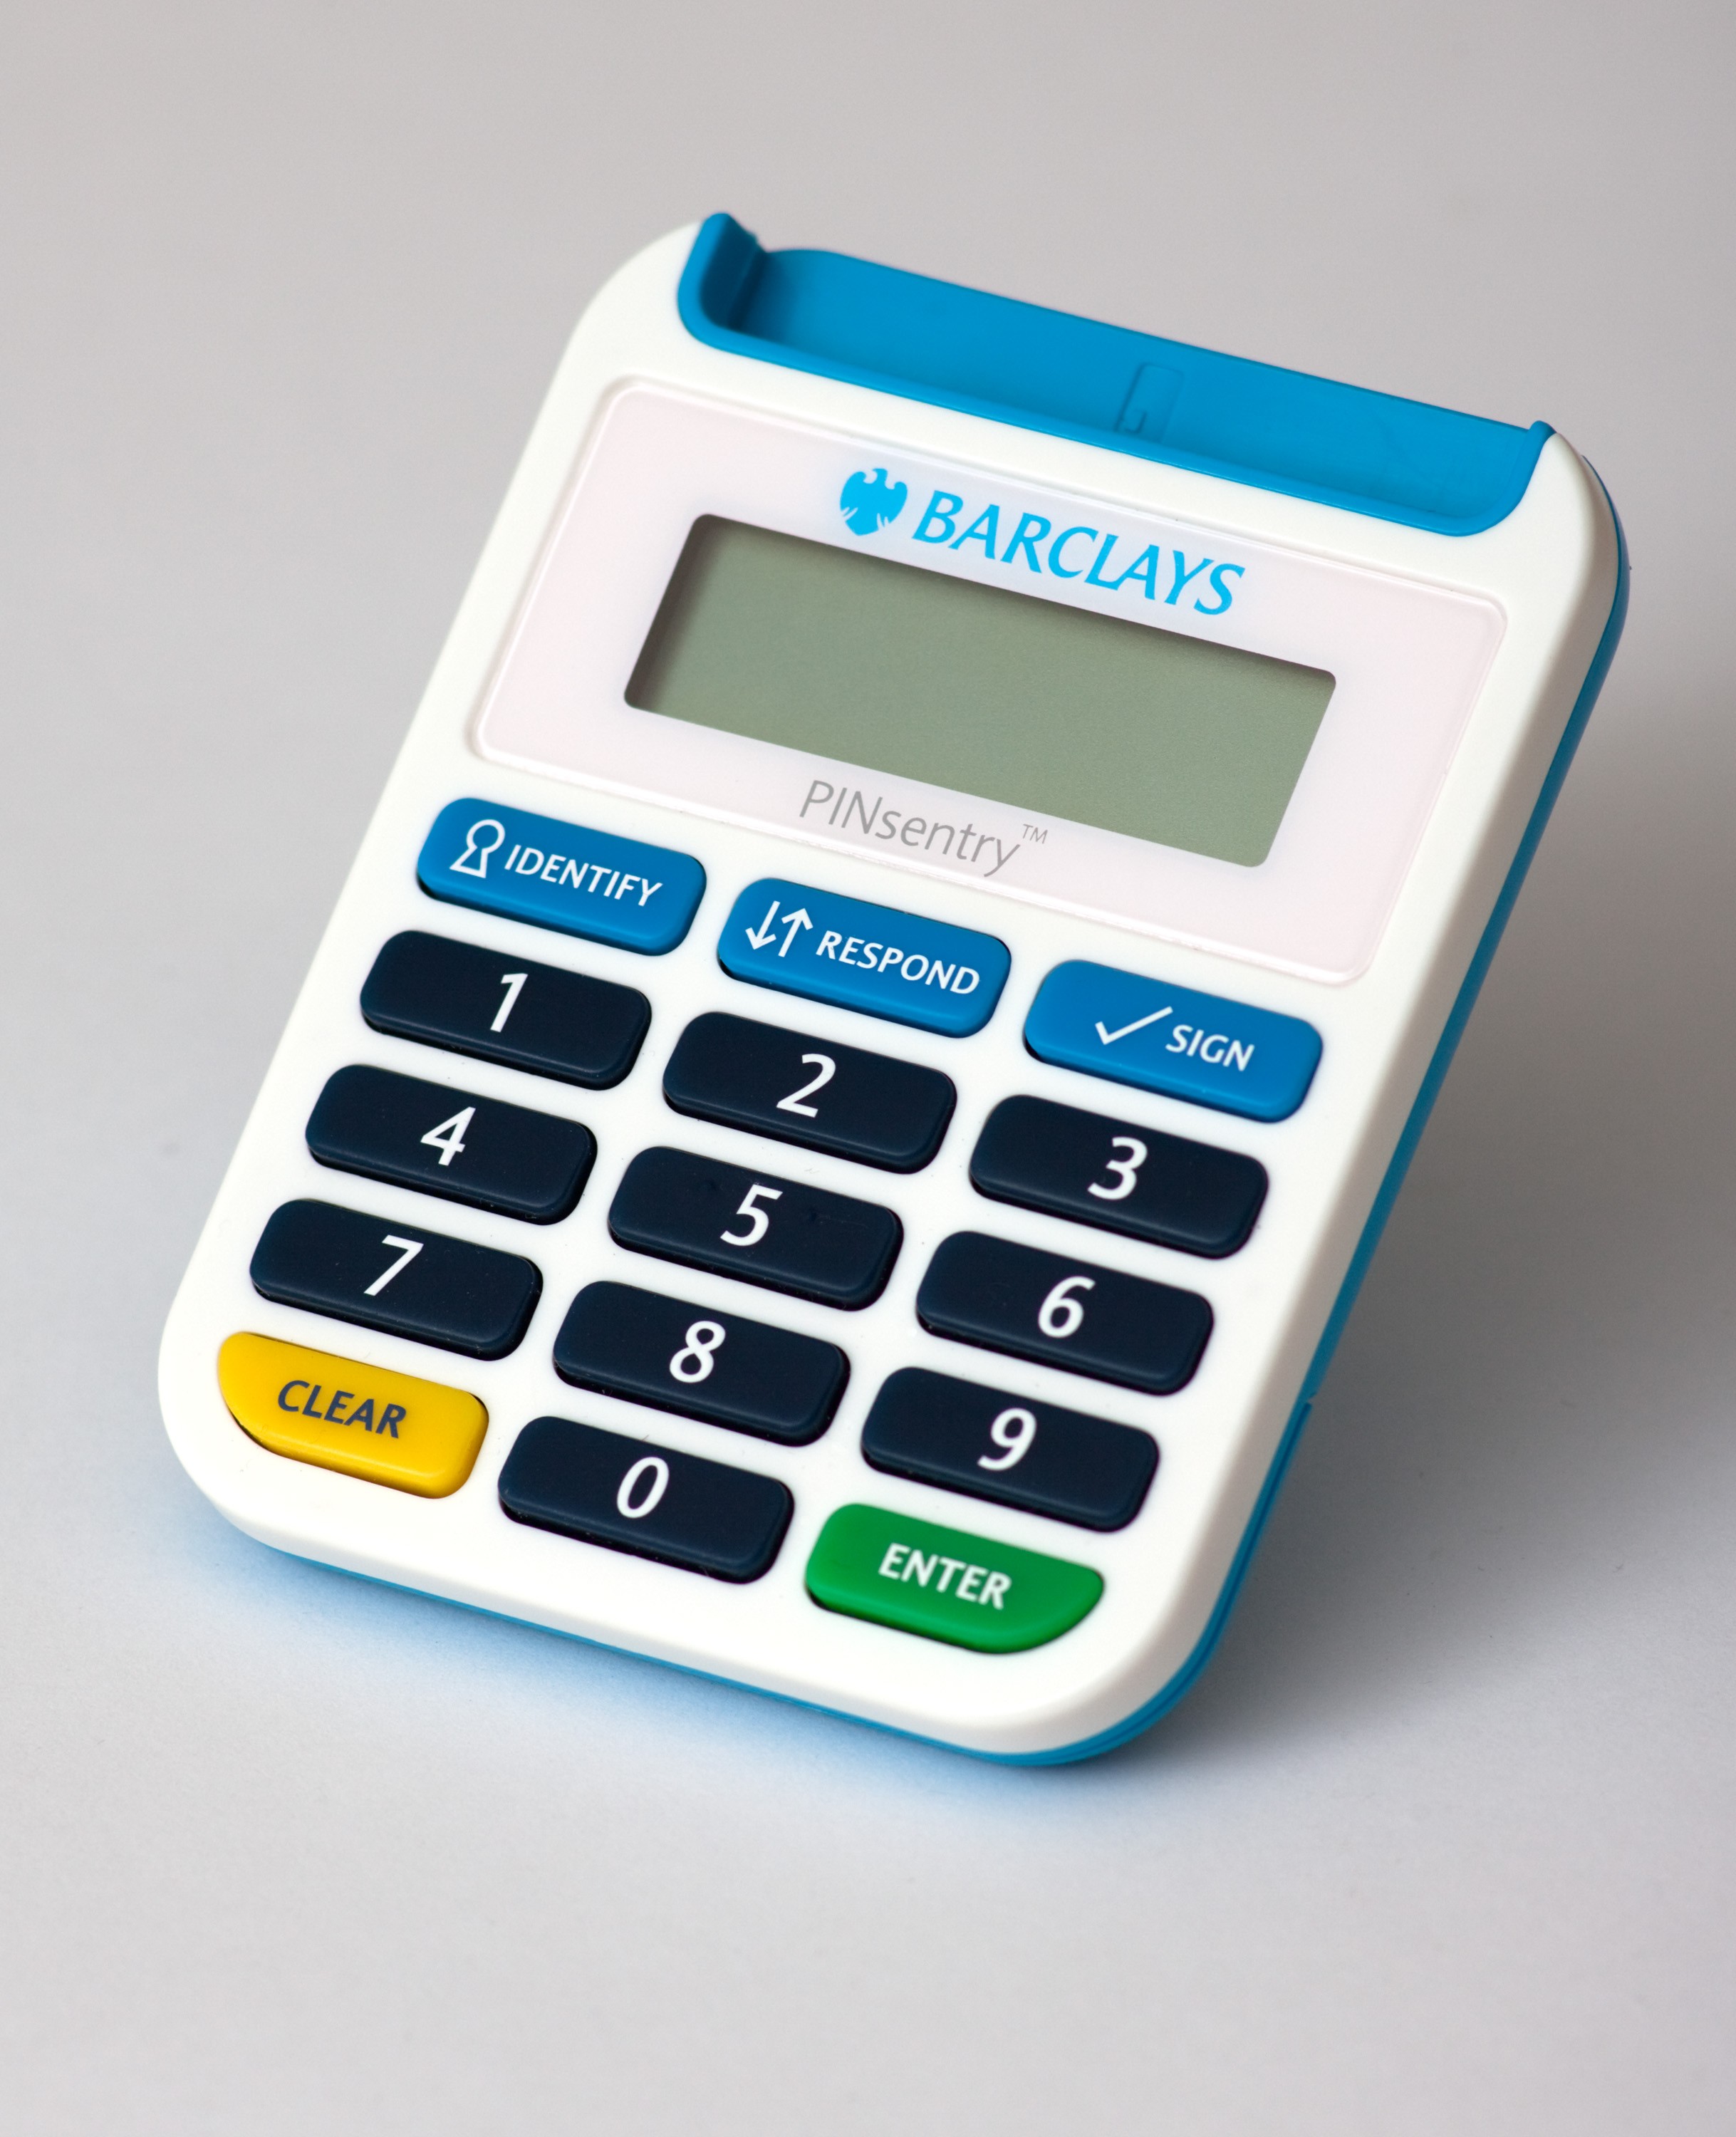 Barclays Pinsentry 5920